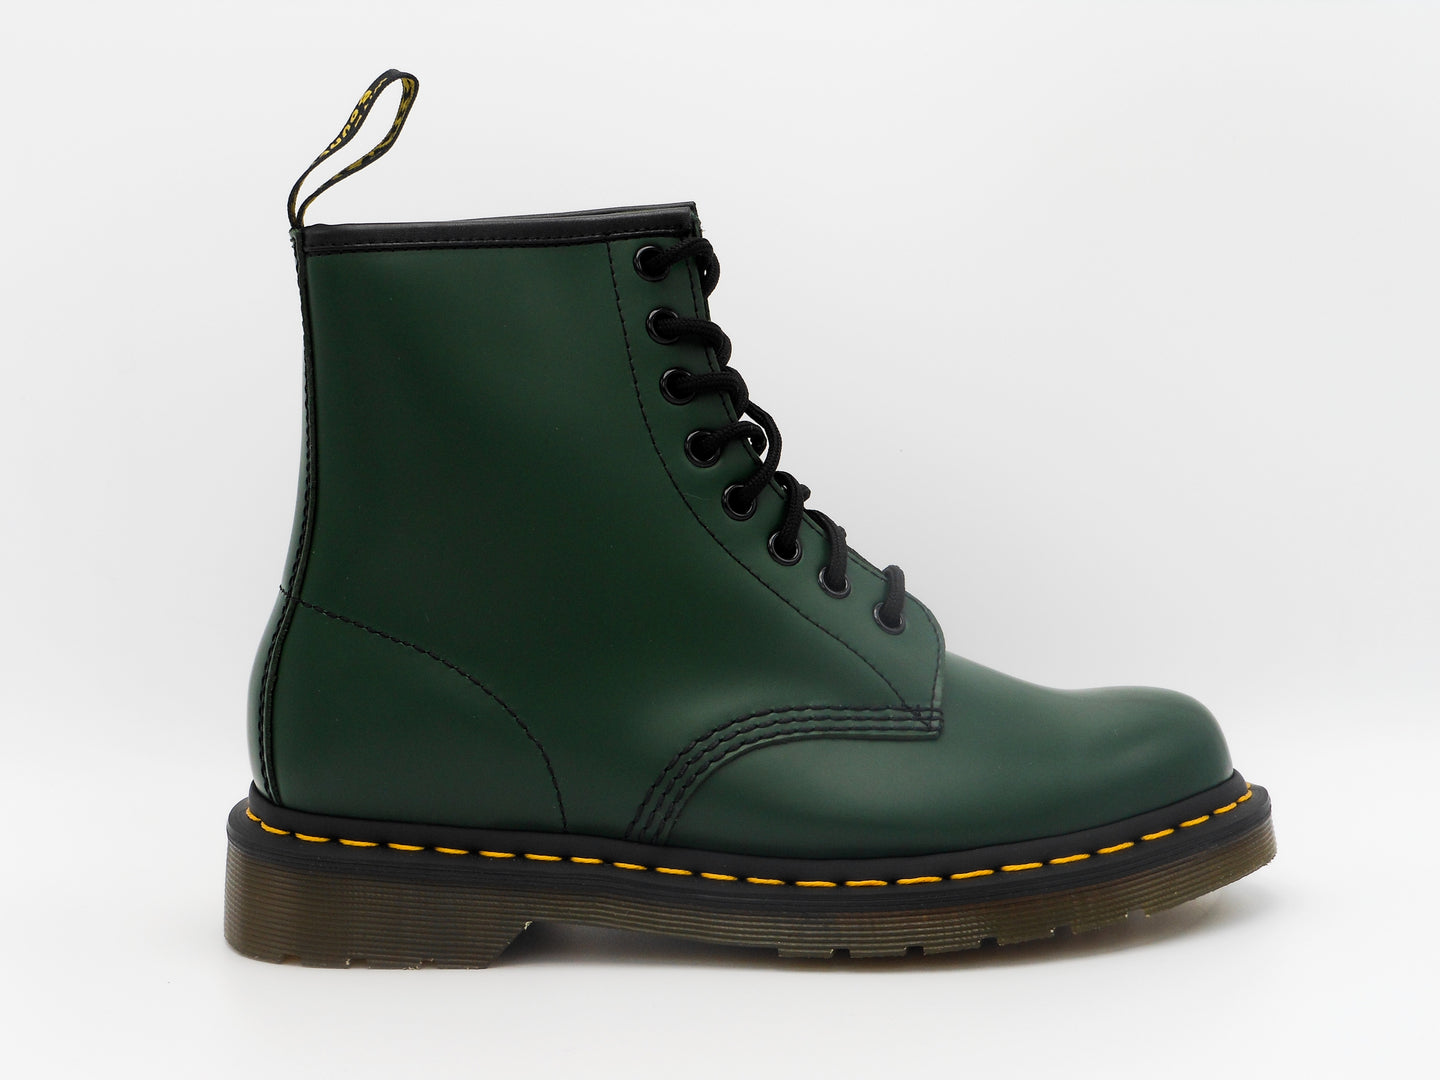 DR. MARTENS 1460 green smooth